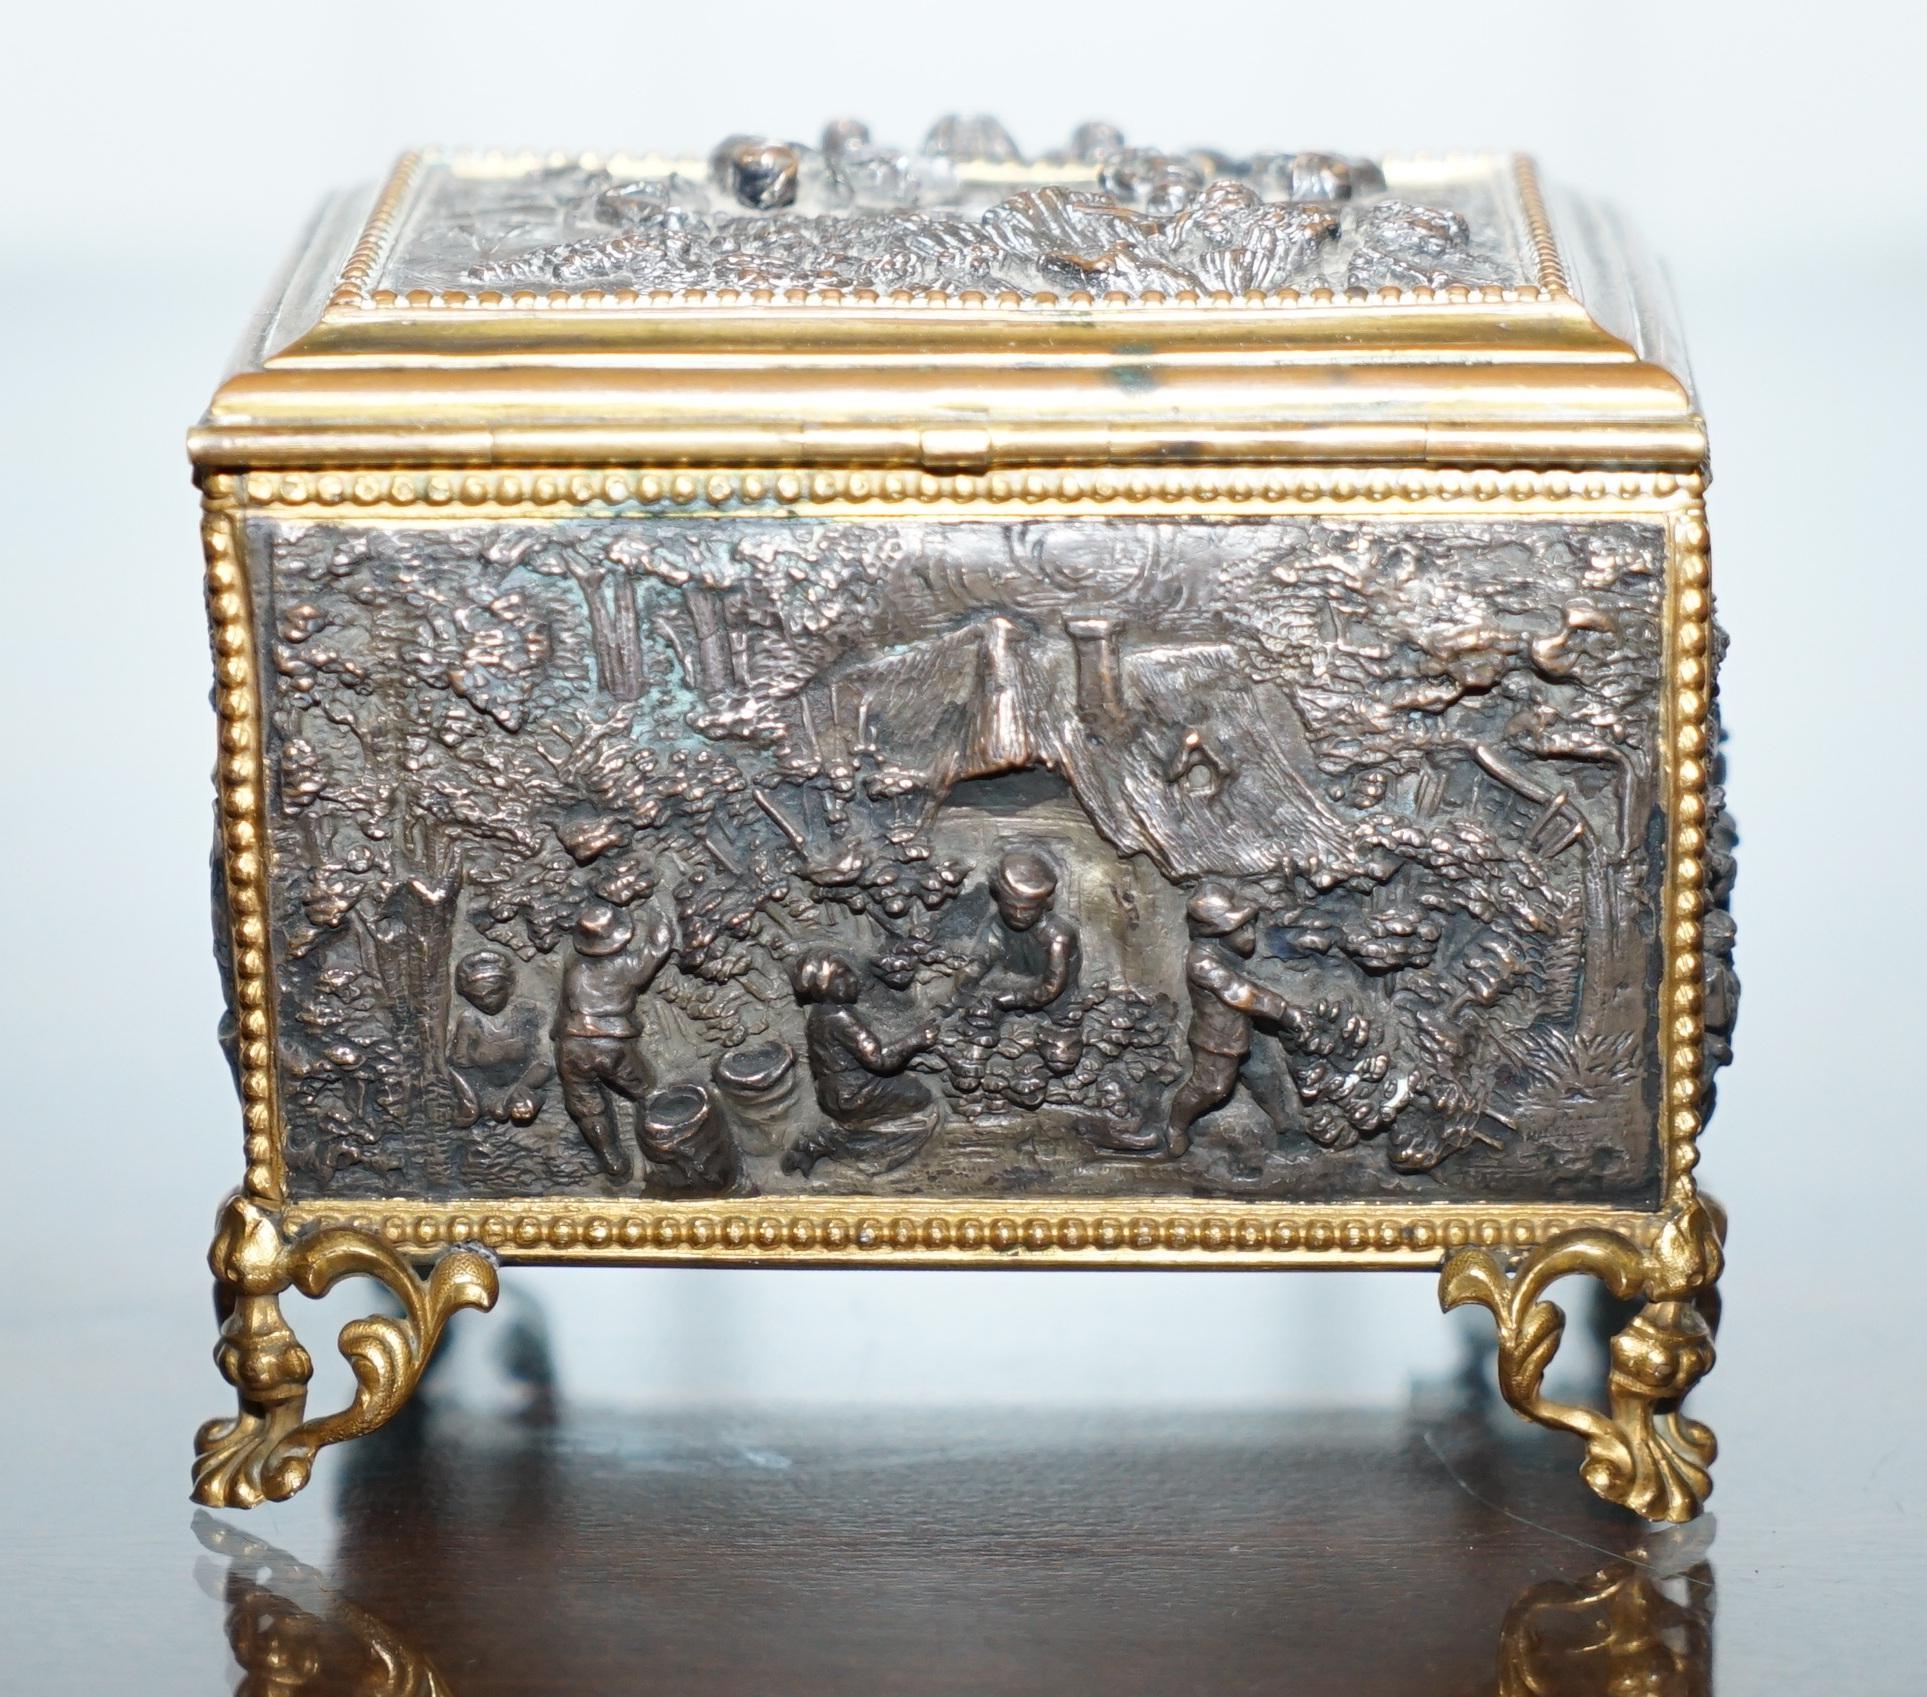 AB Paris Signed French Bronze and Gilt Brass Jewelry Casket Box Chest circa 1880 1